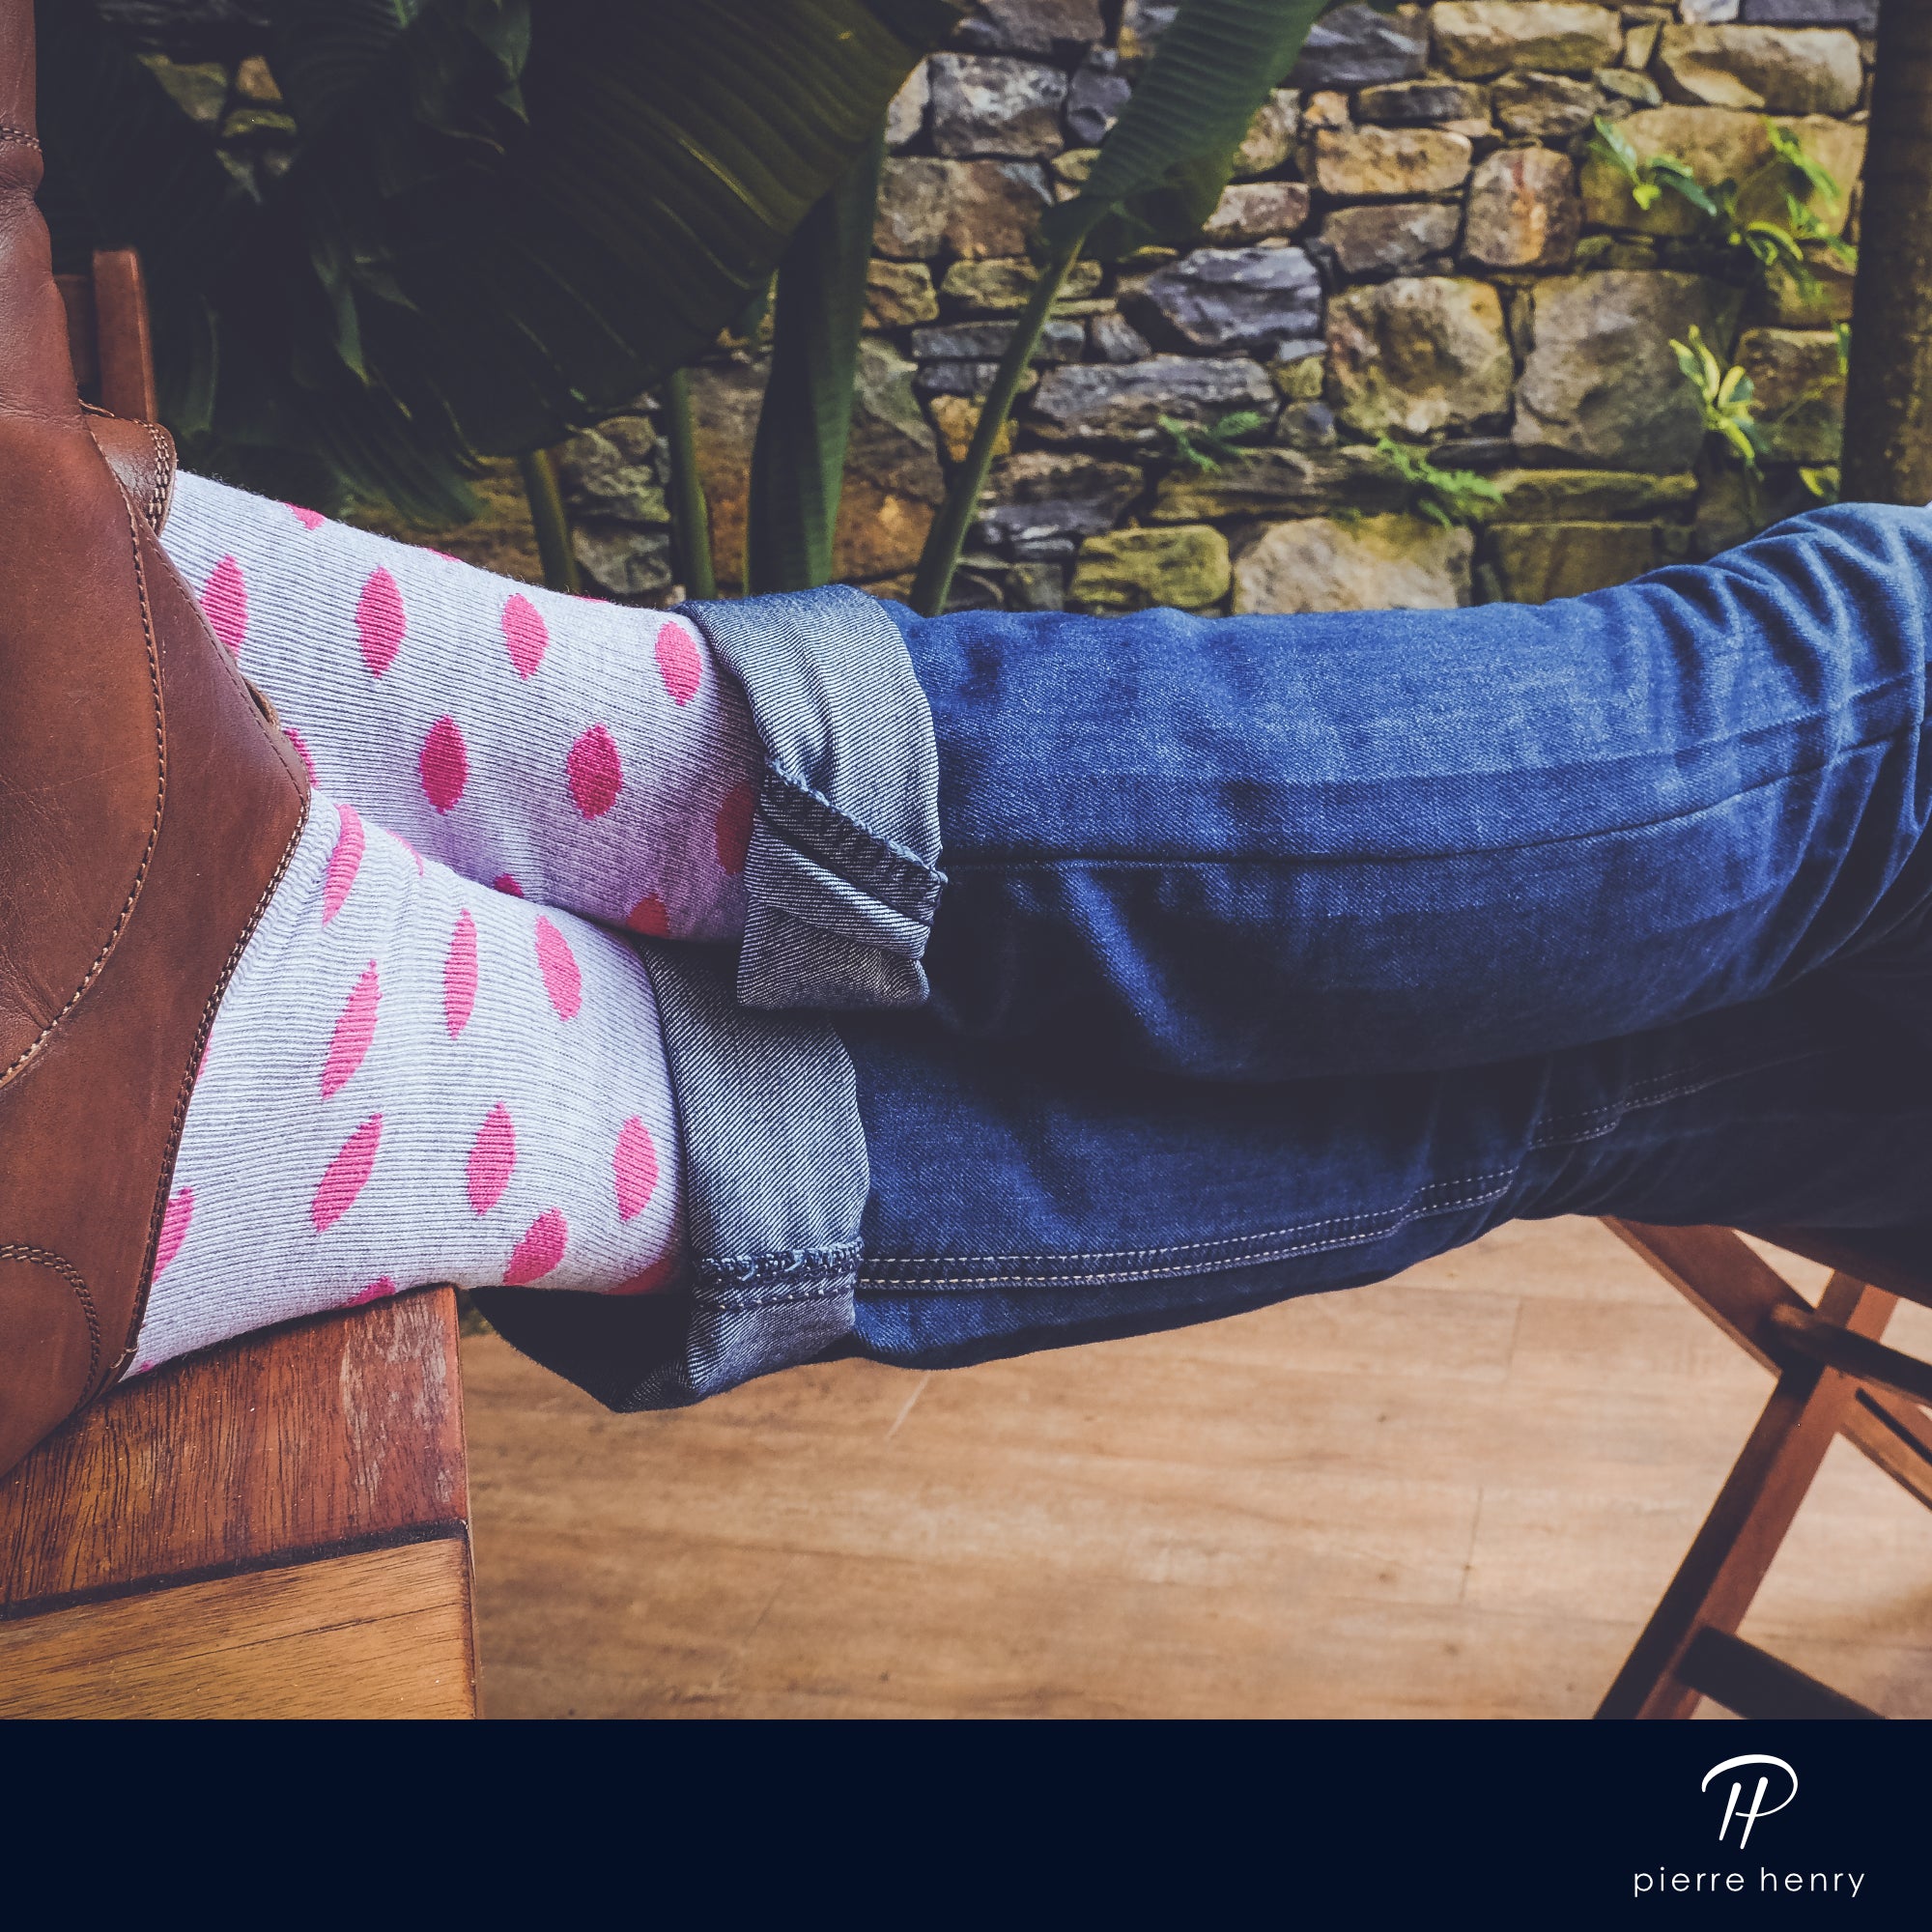 light grey over the calf dress socks with pink polka dots, brown dress shoes, legs crossed, blue jeans